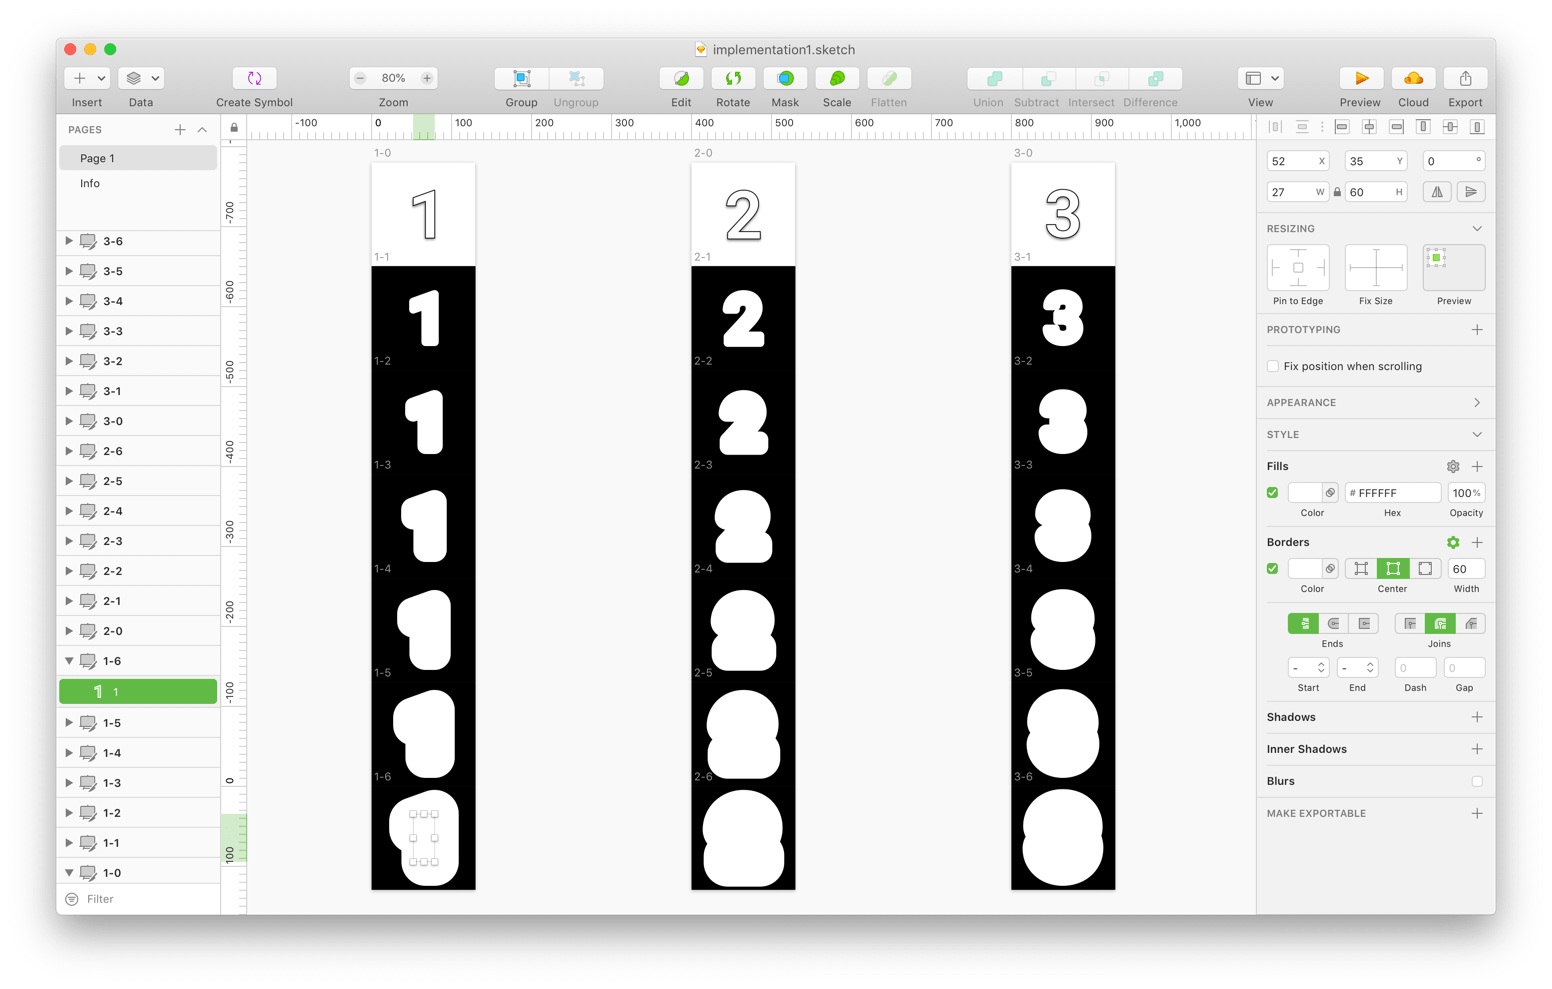 Screenshot of Sketch app showing 7 layers for each number